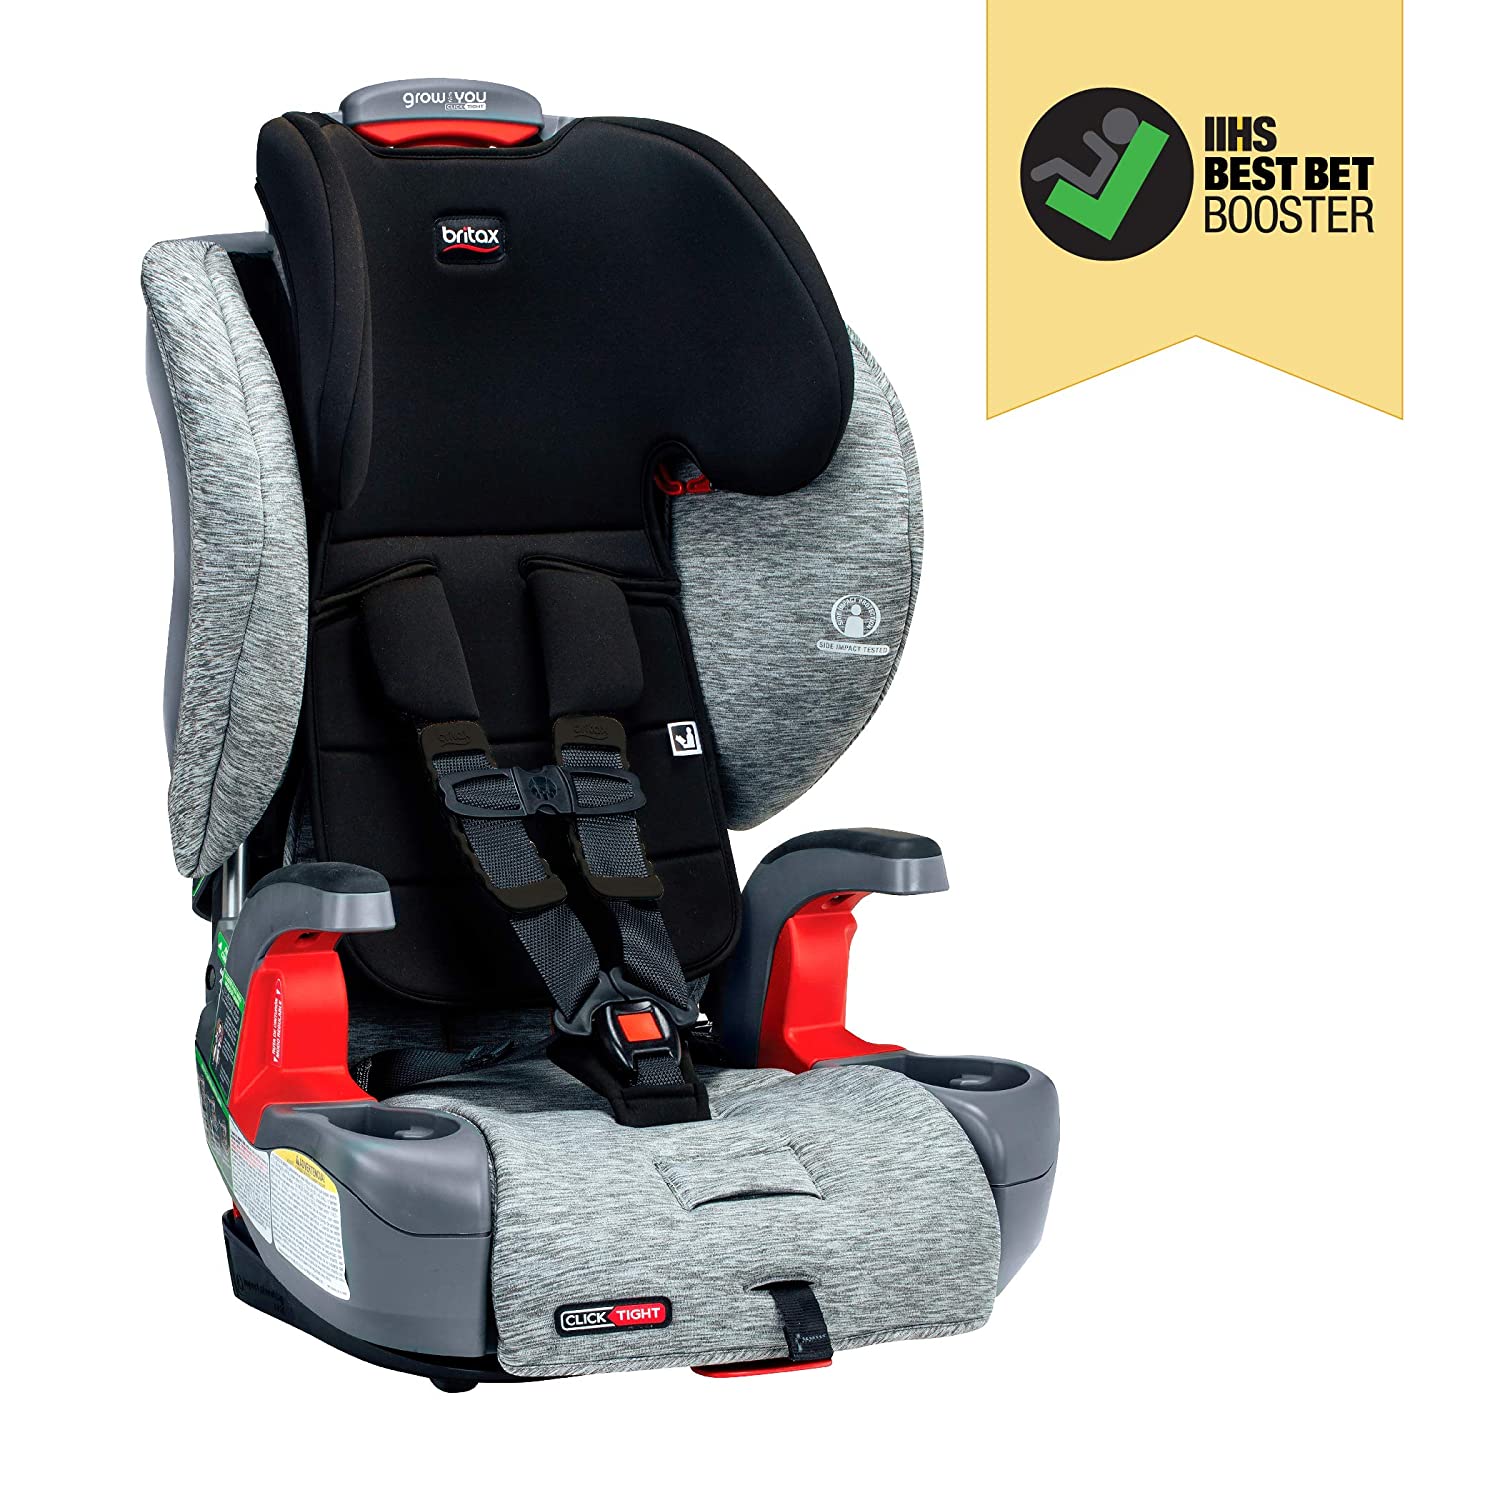 Best Forward Facing Car Seats For 2021, How To Take The Back Off A Britax Booster Seat